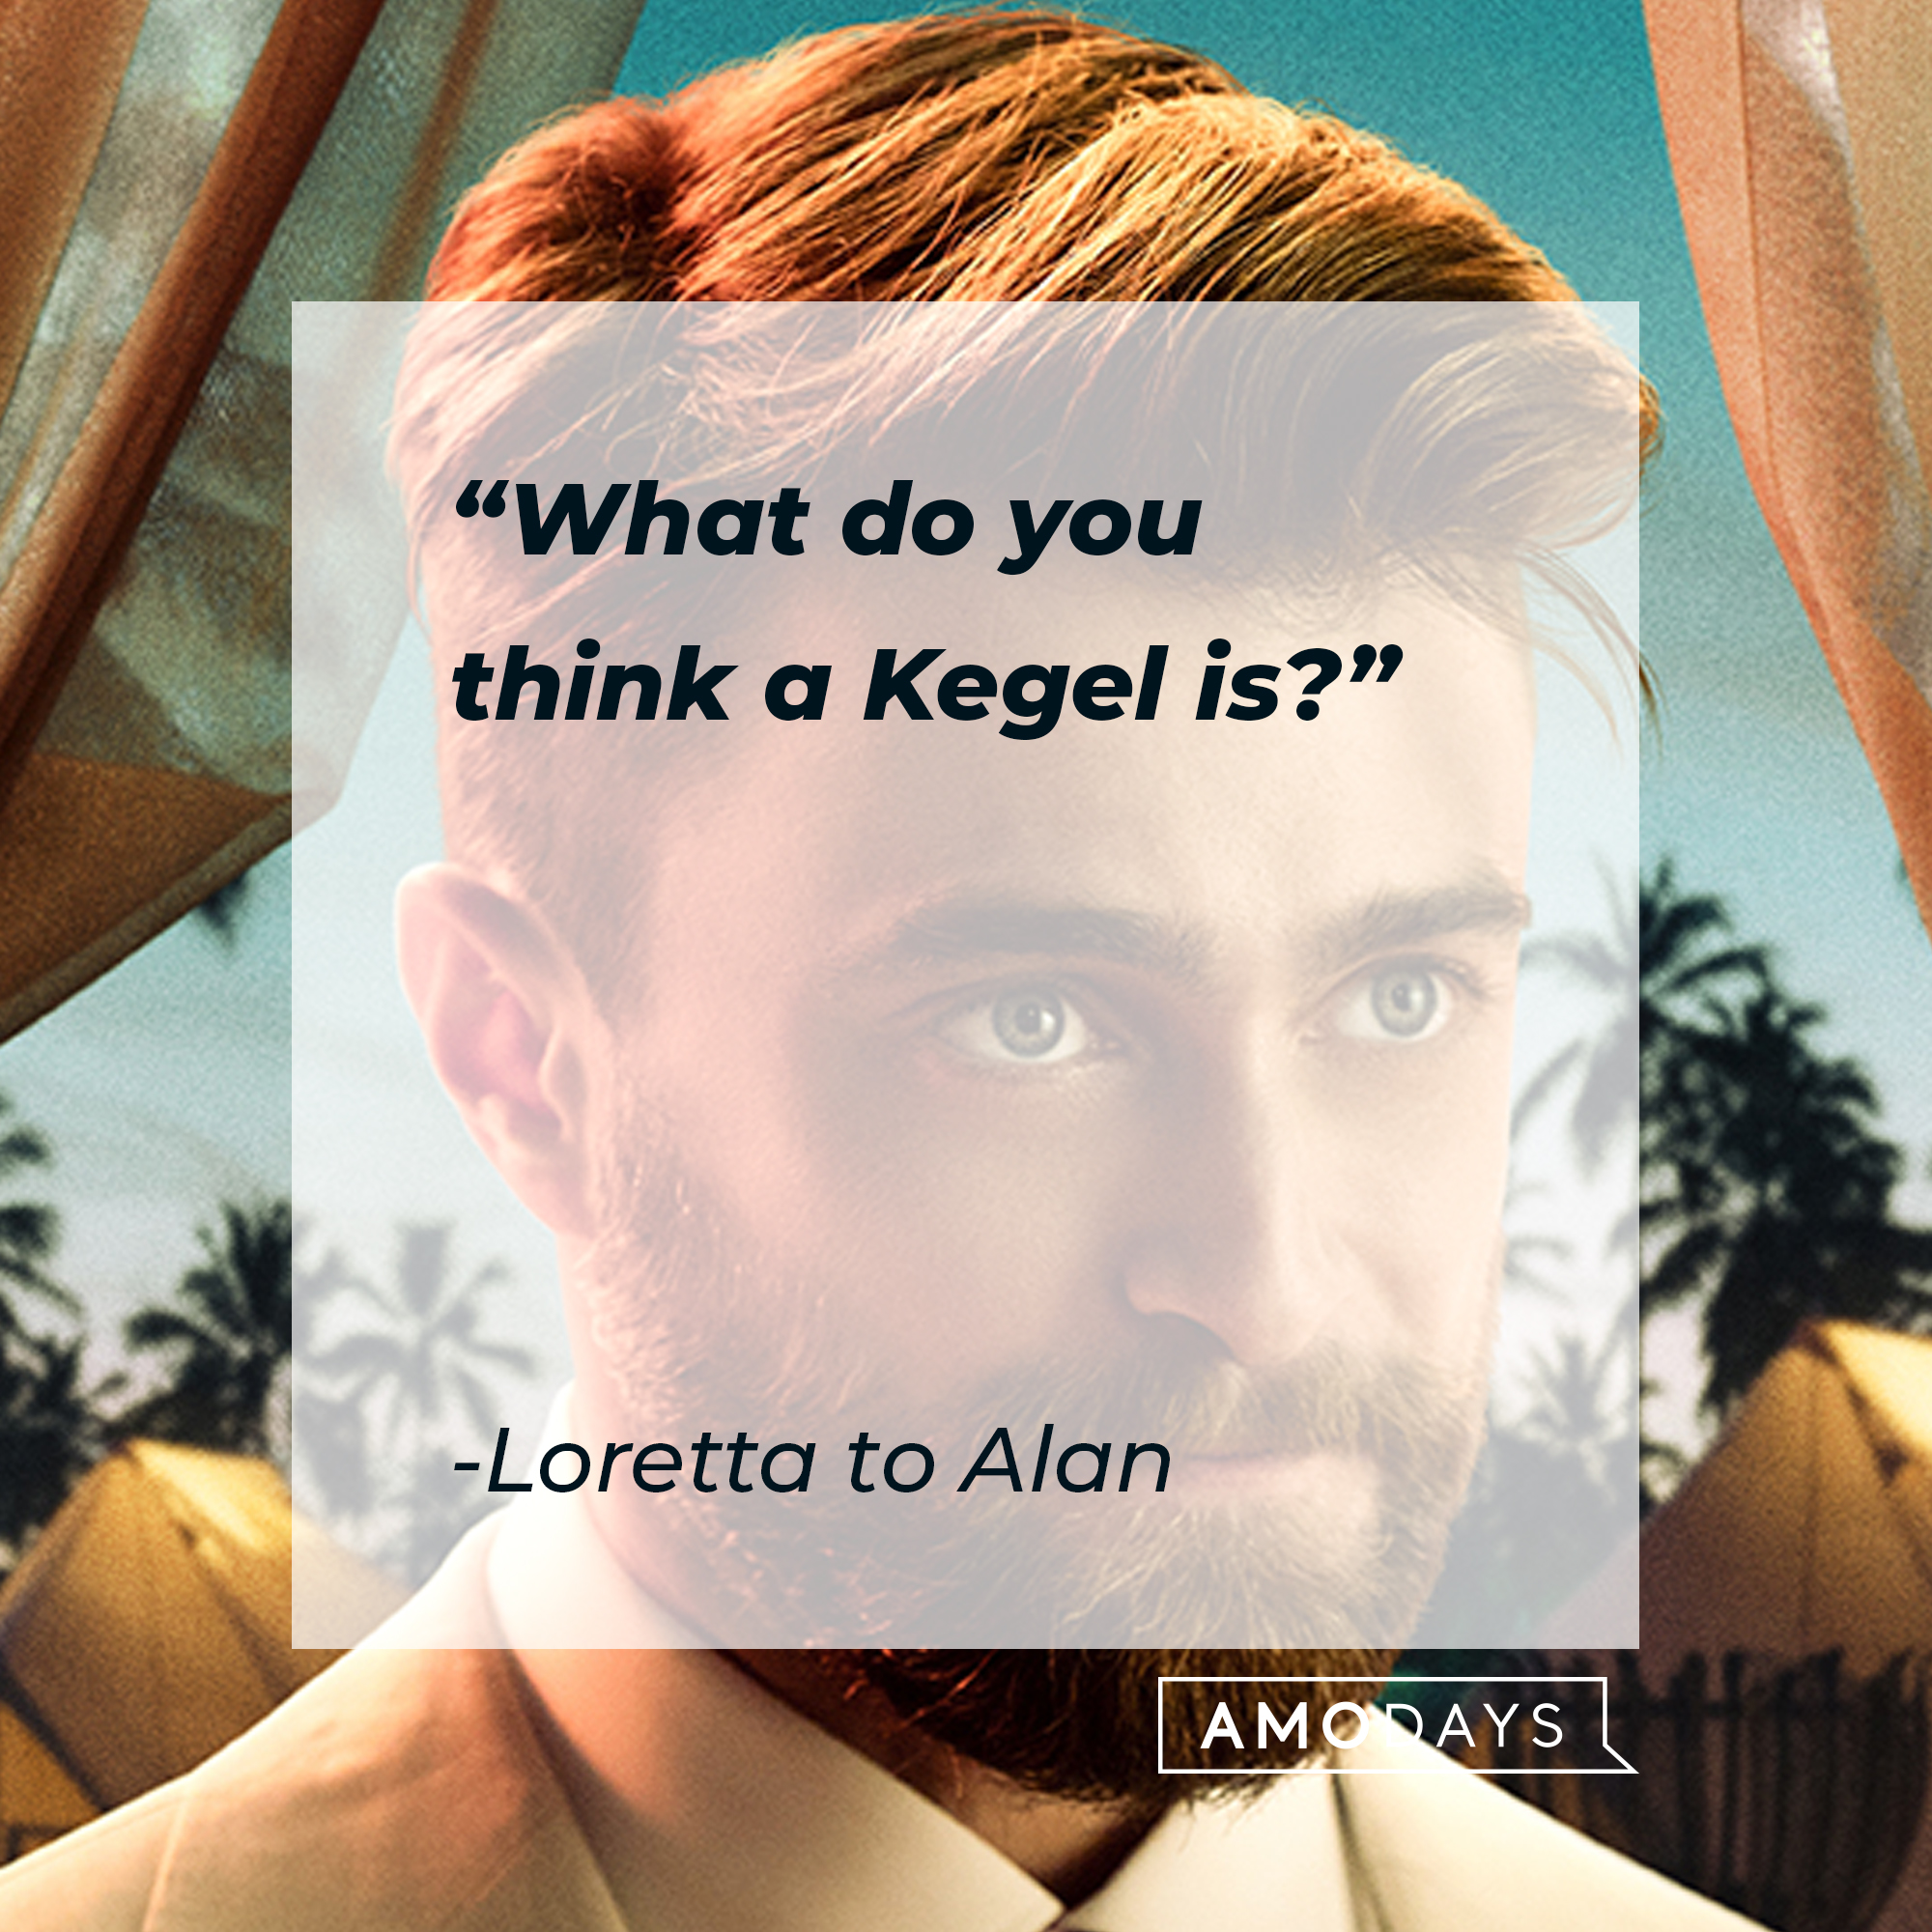 Loretta to Alan quote: "What do you think a Kegel is?" | Source: facebook.com/TheLostCityMovie